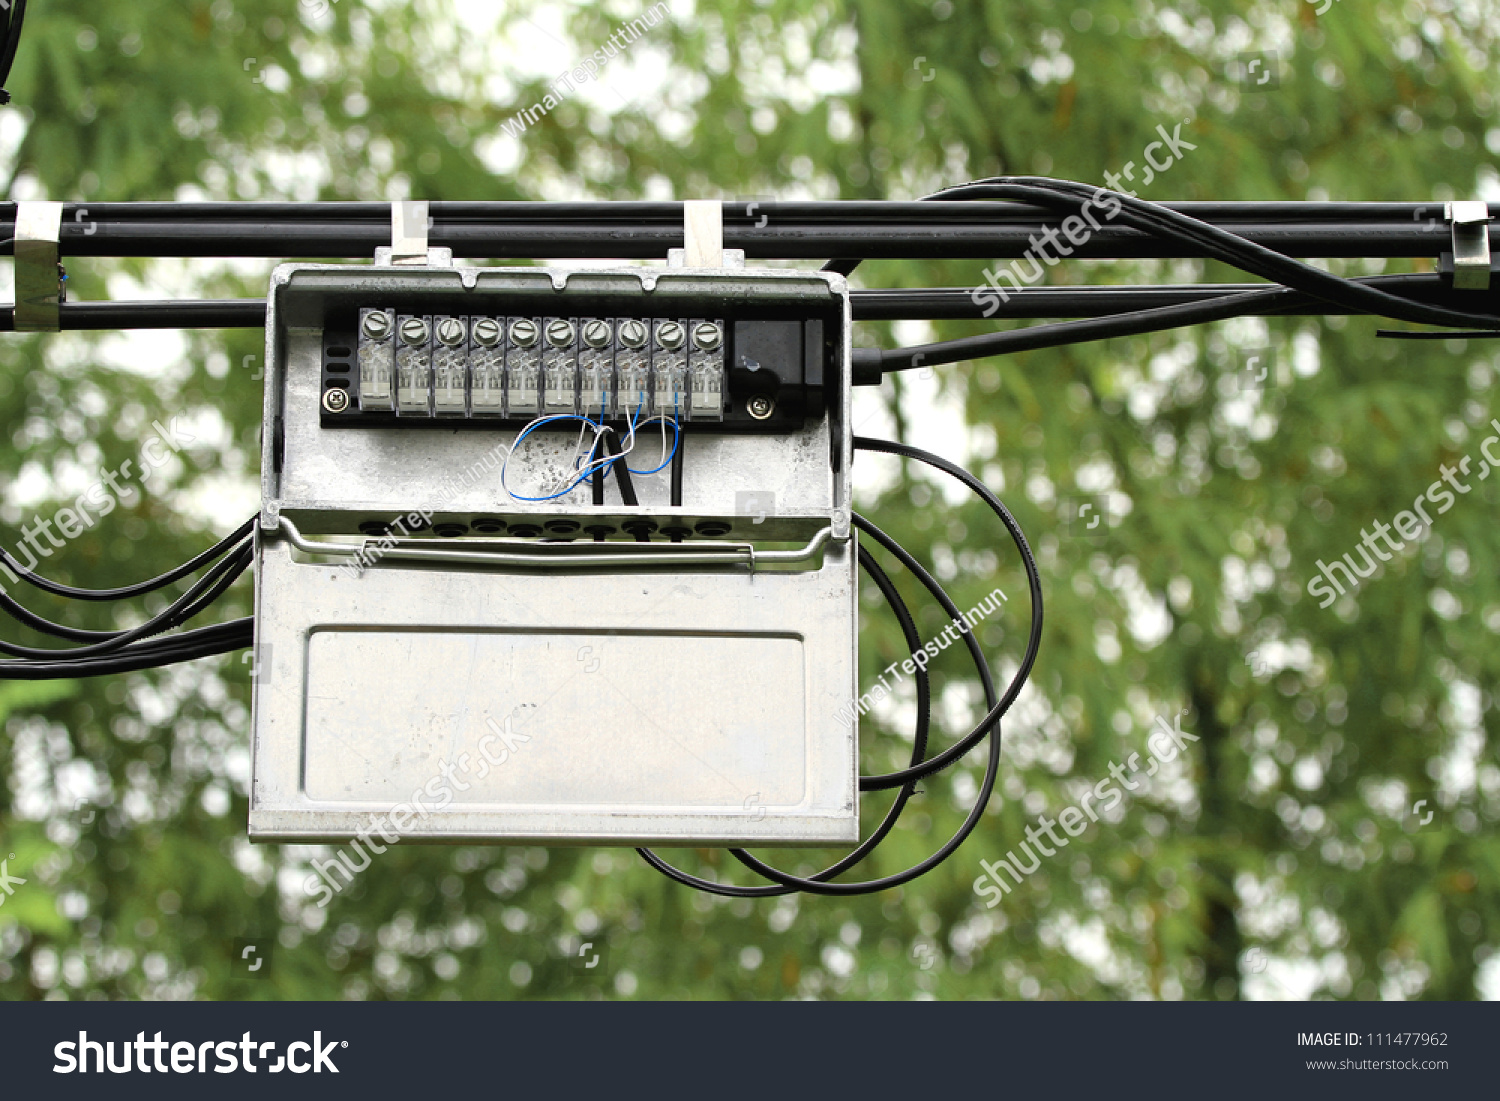 Outdoor Junction Box Of Telephone Cable Stock Photo